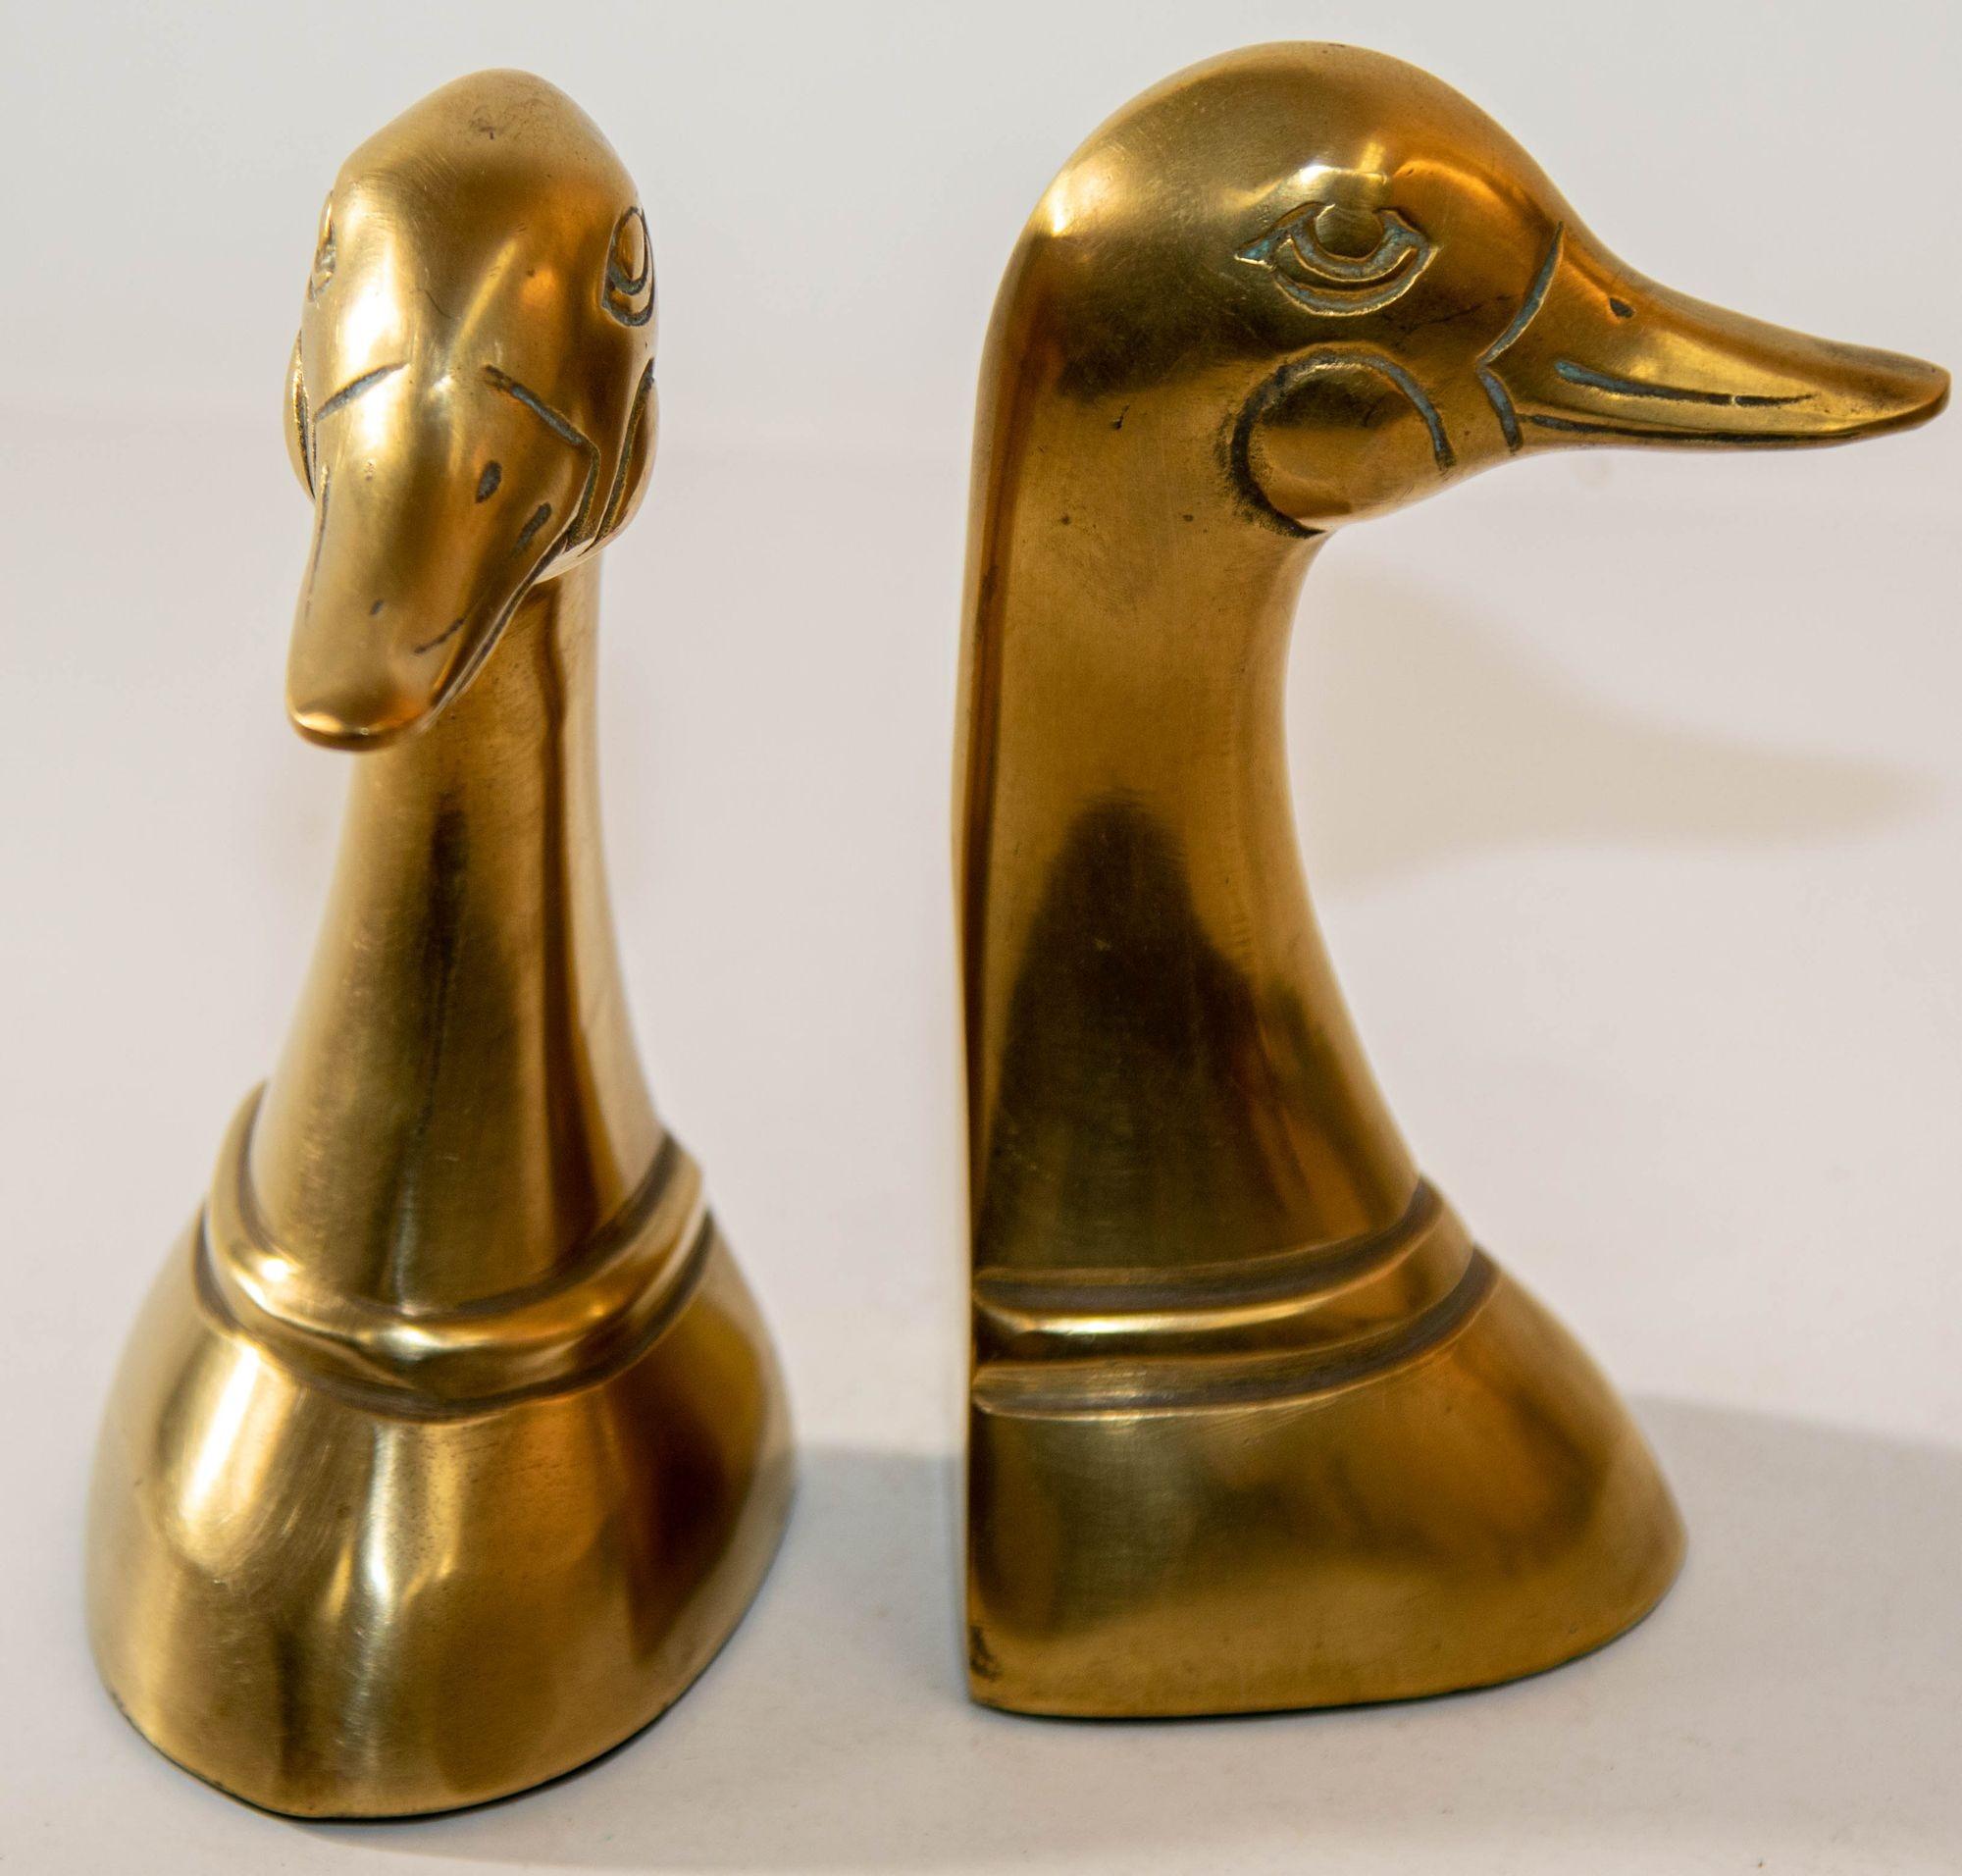 American Polished Solid Brass Mallard Duck Head Bookends Sarreid Style 1950's A Pair For Sale